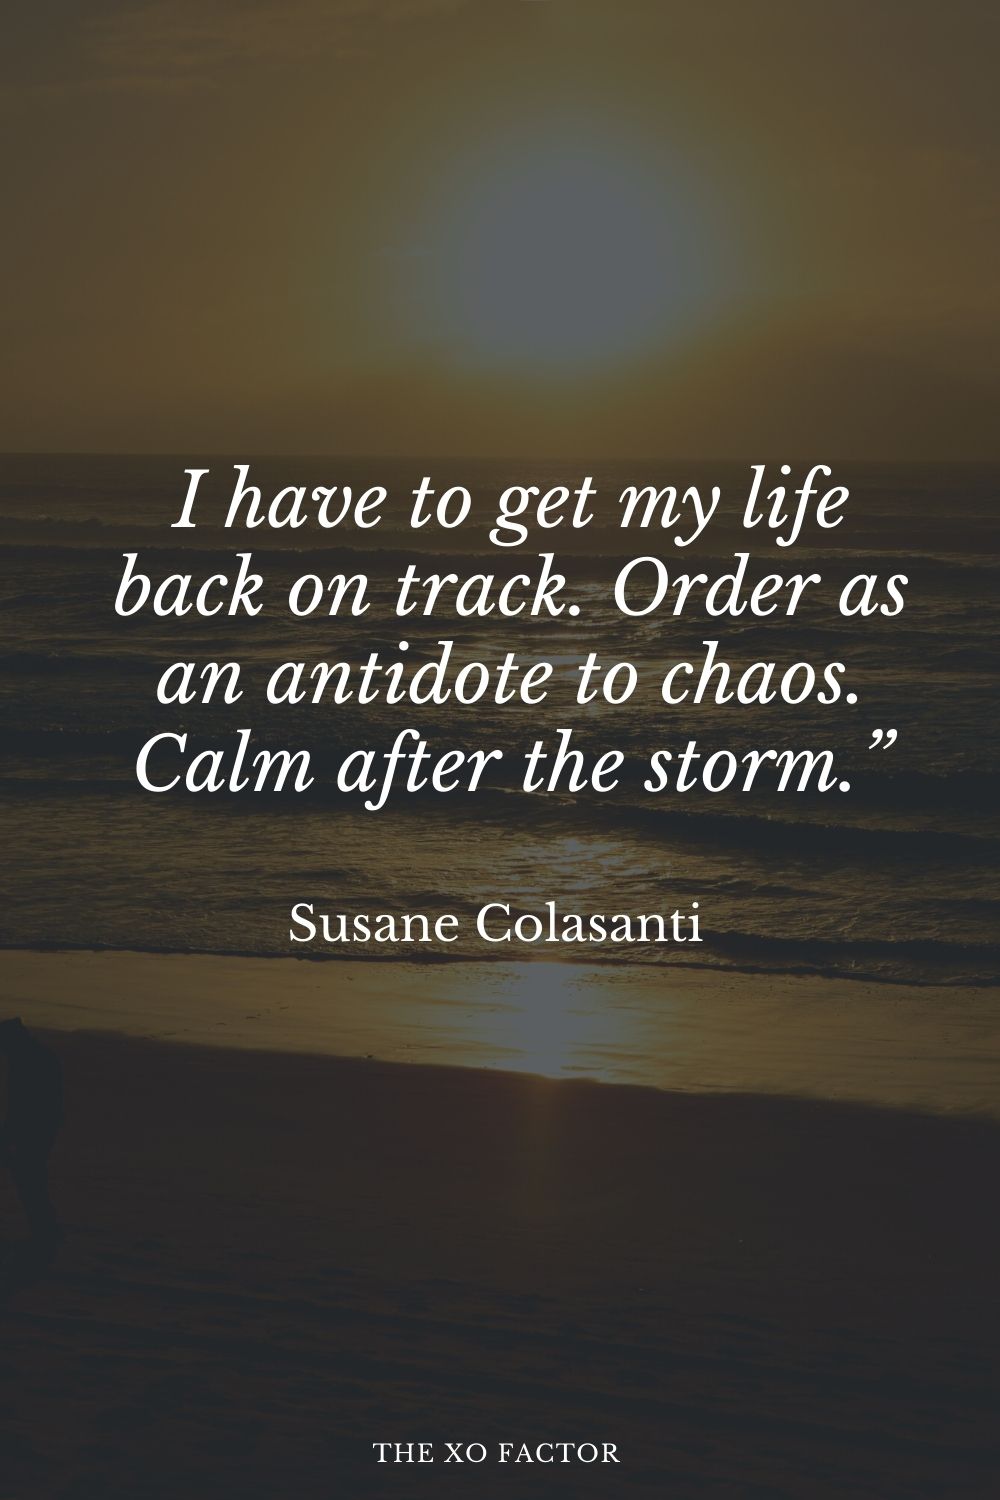 I have to get my life back on track. Order as an antidote to chaos. Calm after the storm.” Susane Colasanti